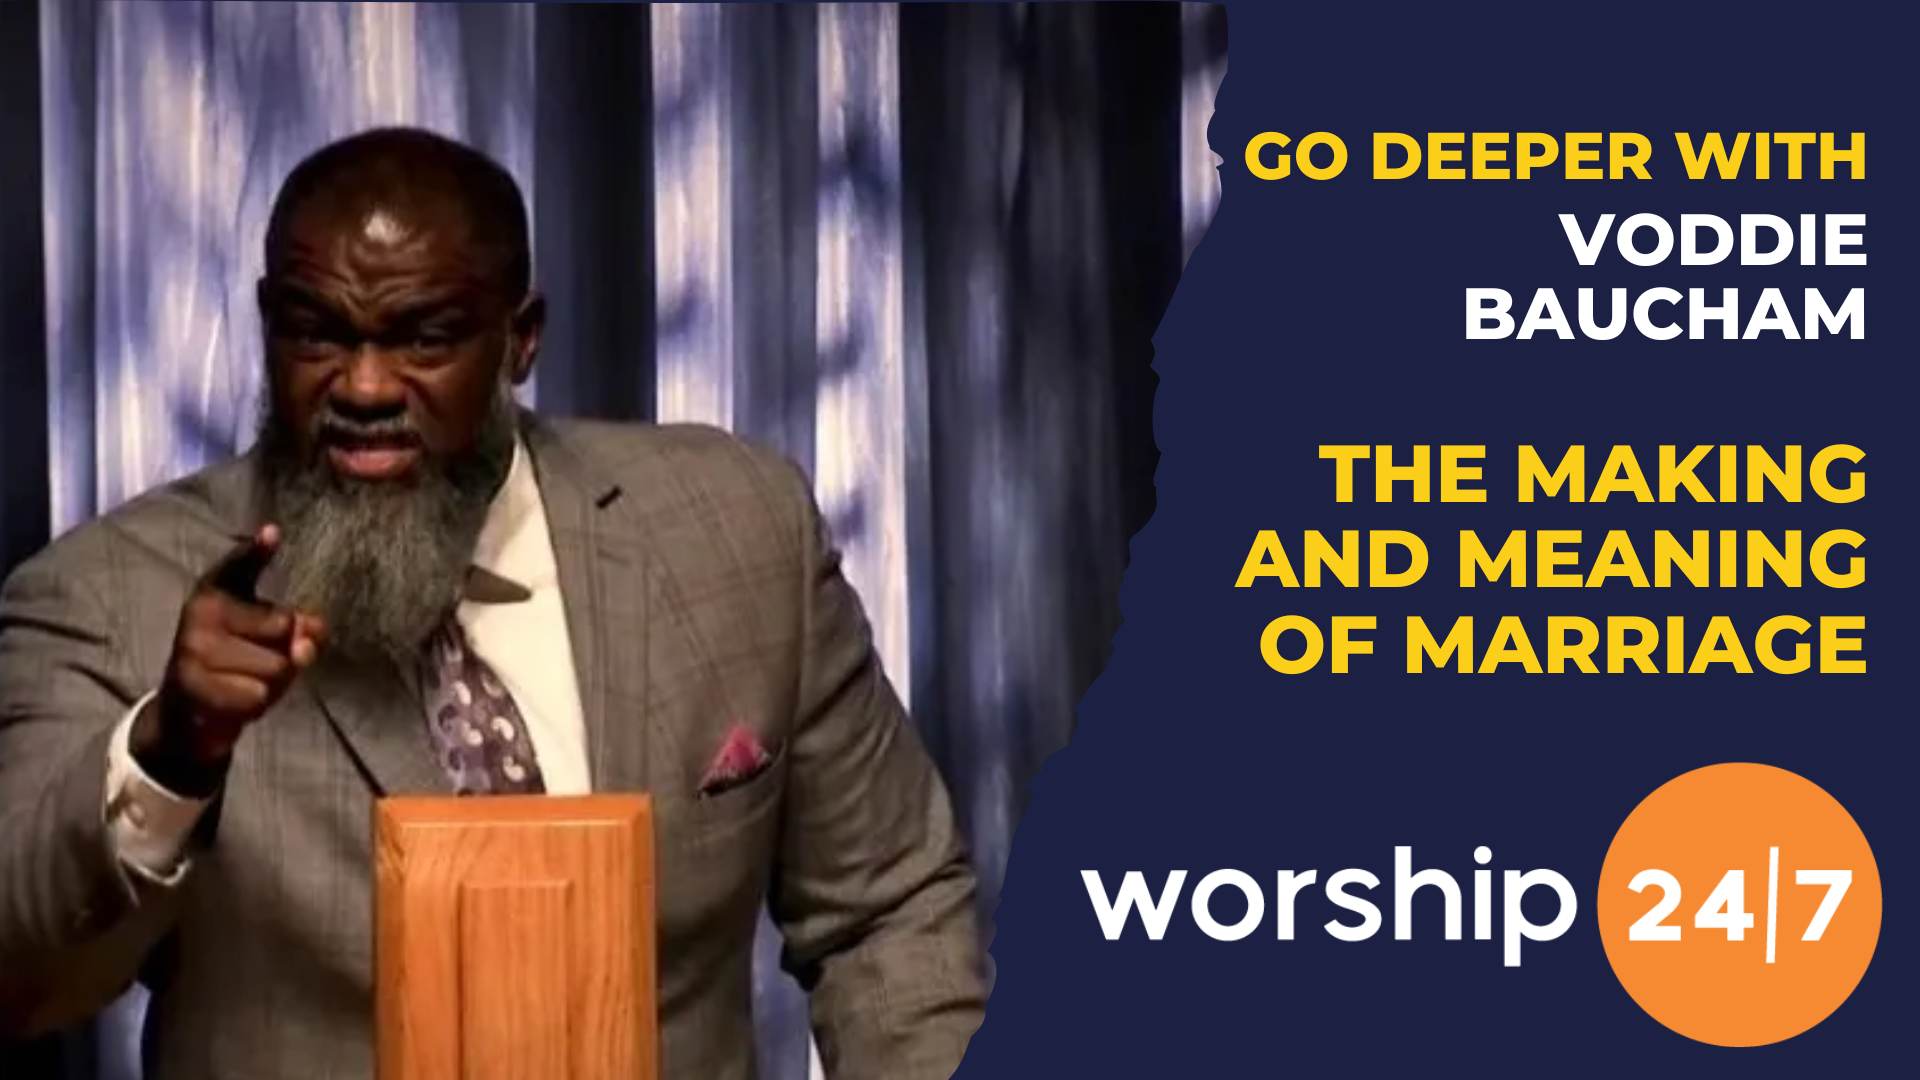 Voddie Baucham The Making and Meaning of Marriage Worship 24/7